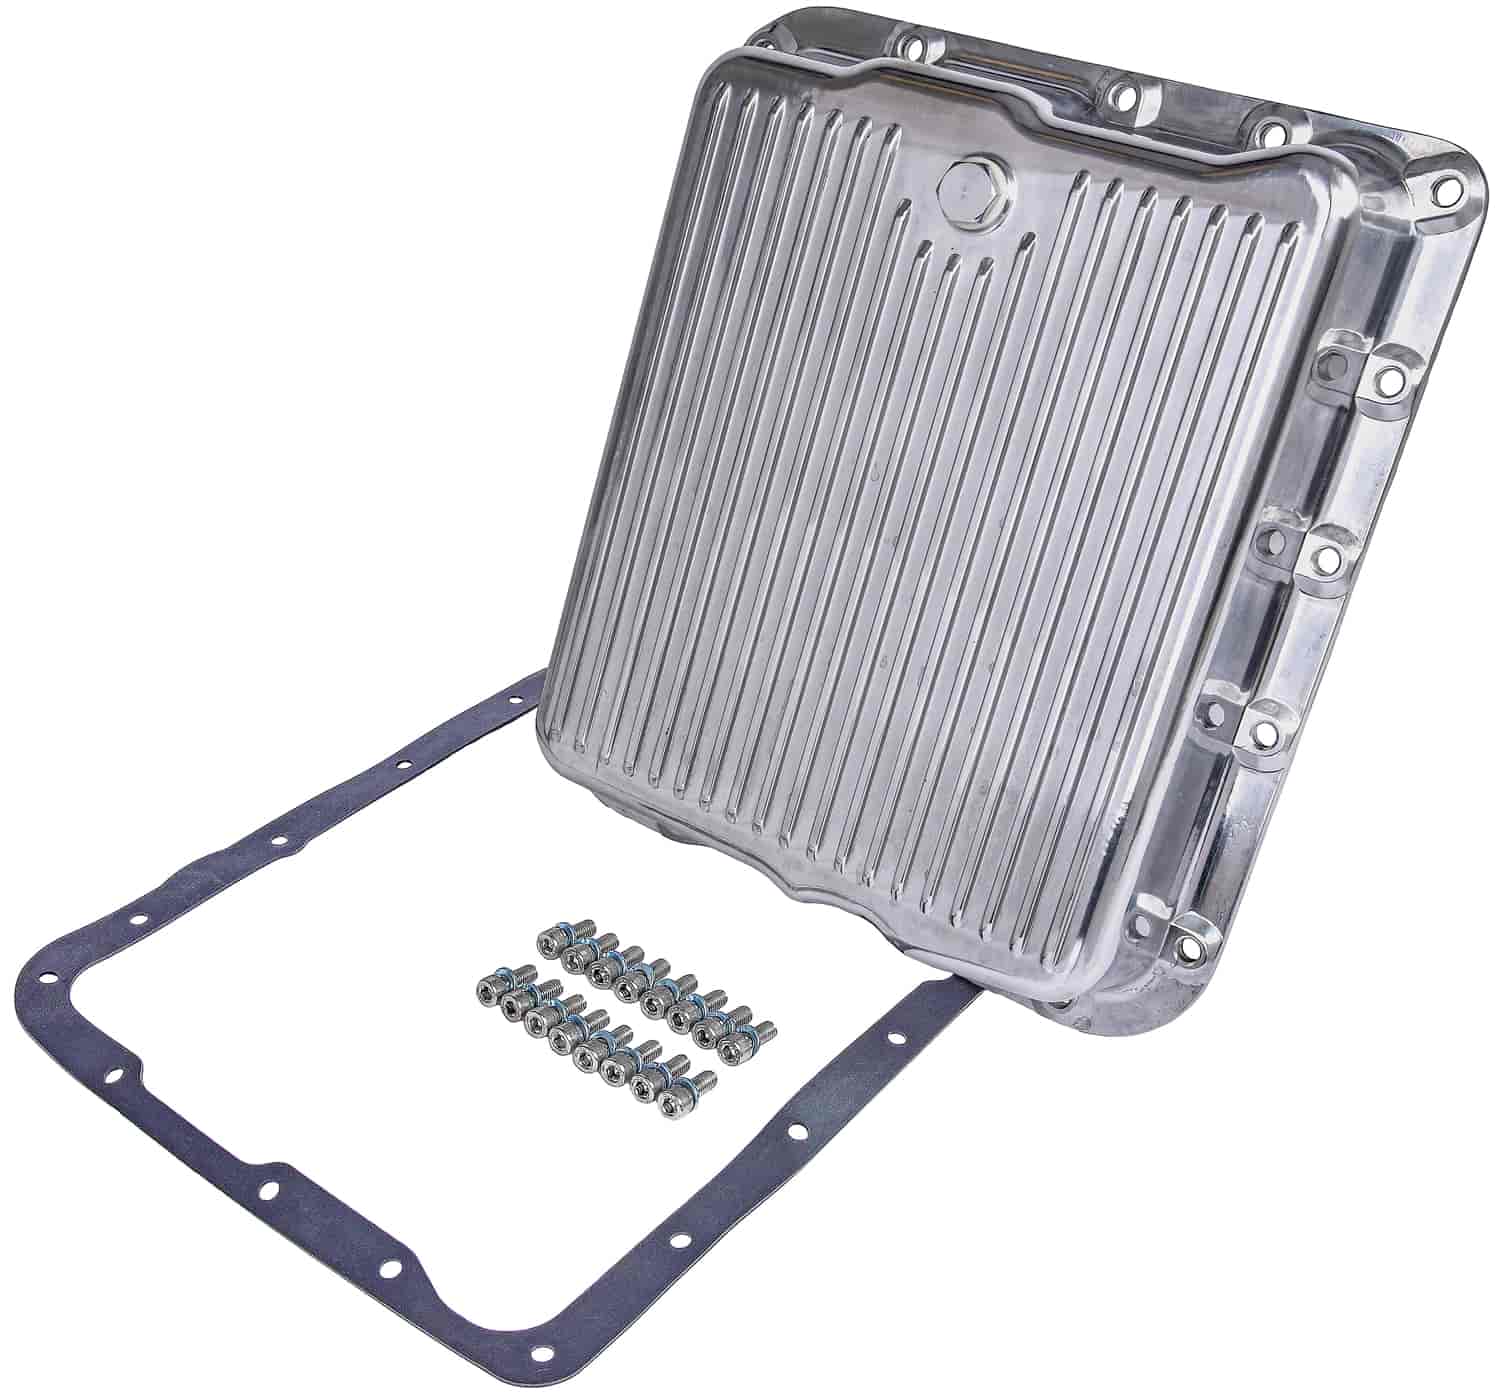 JEGS Transmission Pan Fits GM Chevrolet TH-350 Transmissions Finned Polished Aluminum 2-5 16” Deep Includes Magnetic Drain Plug, Gasket, An - 4